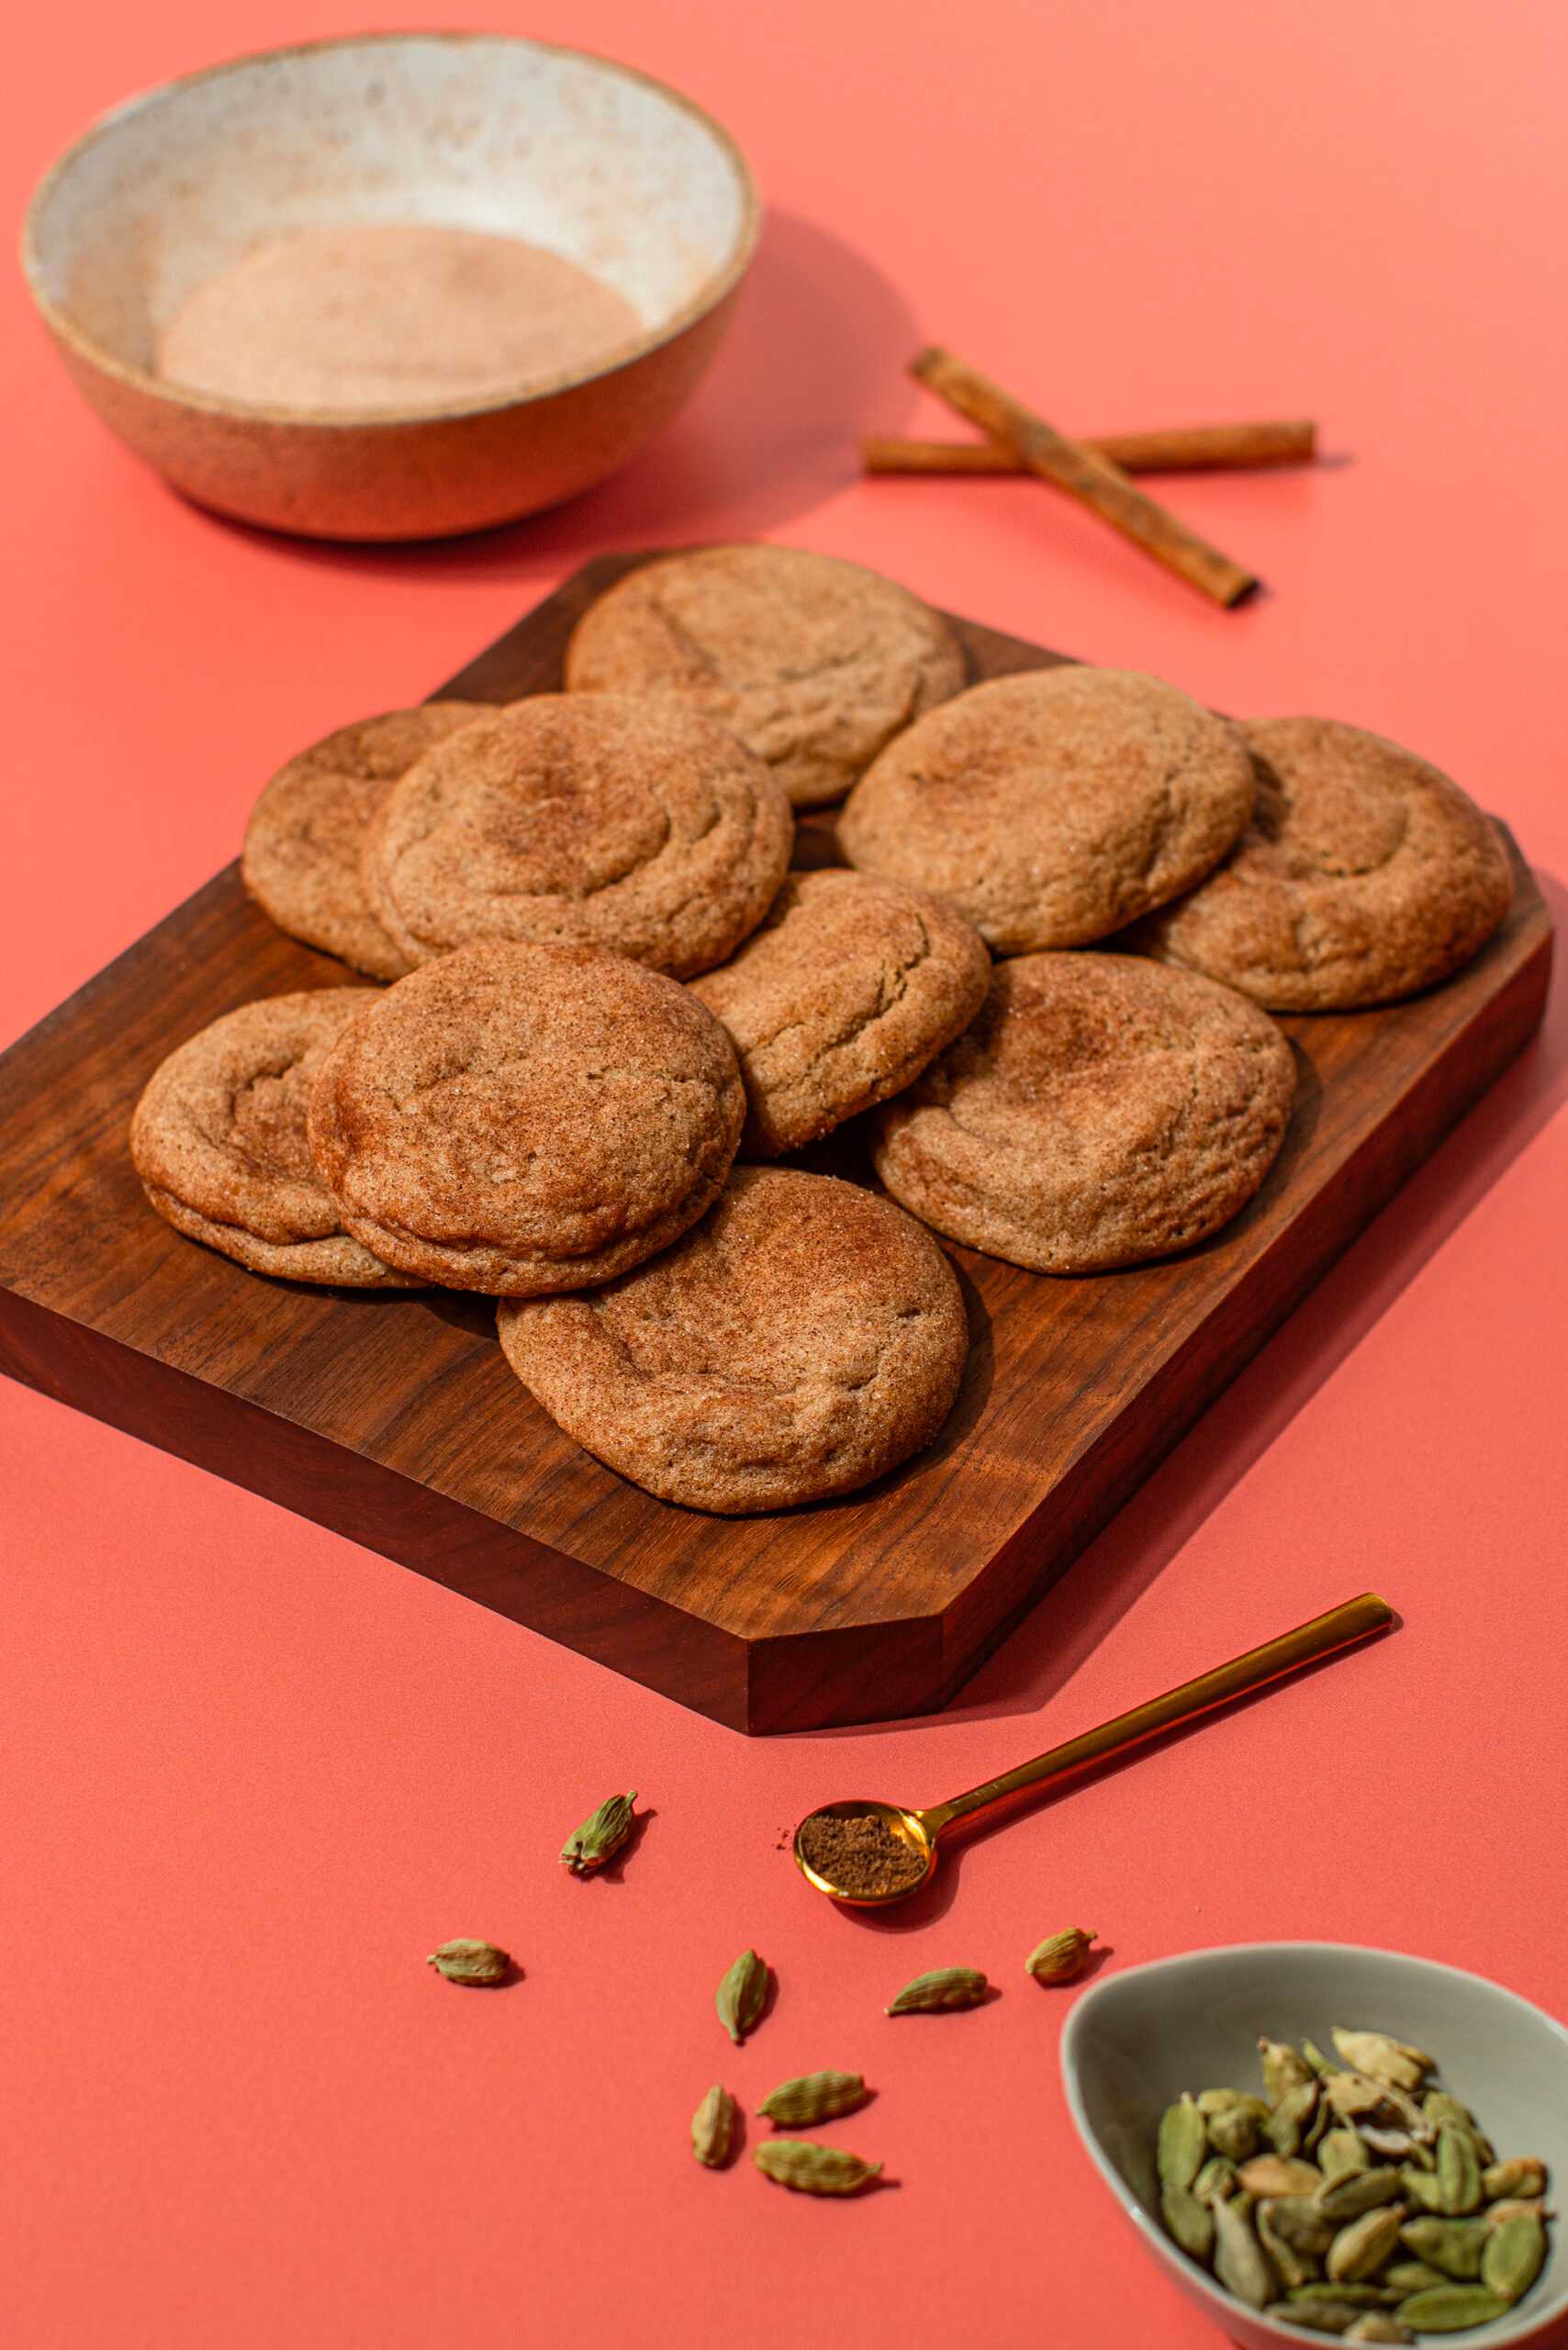 A plate of Chai Snickerdoodles sits at the center of the image.